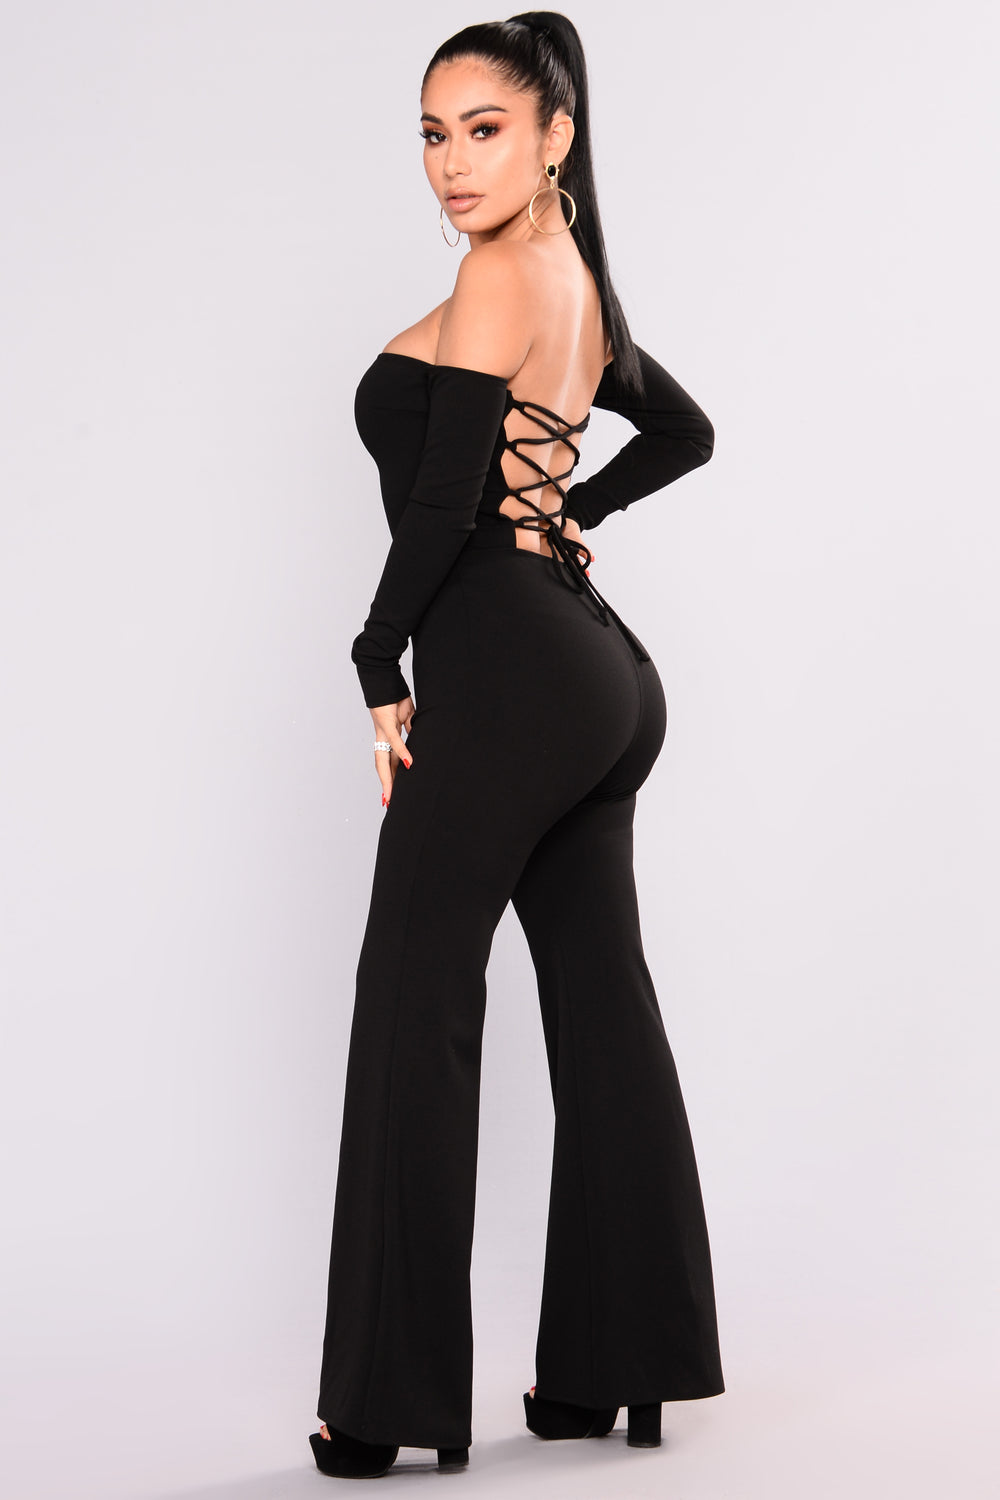 Never Forget You Lace Up Jumpsuit - Black